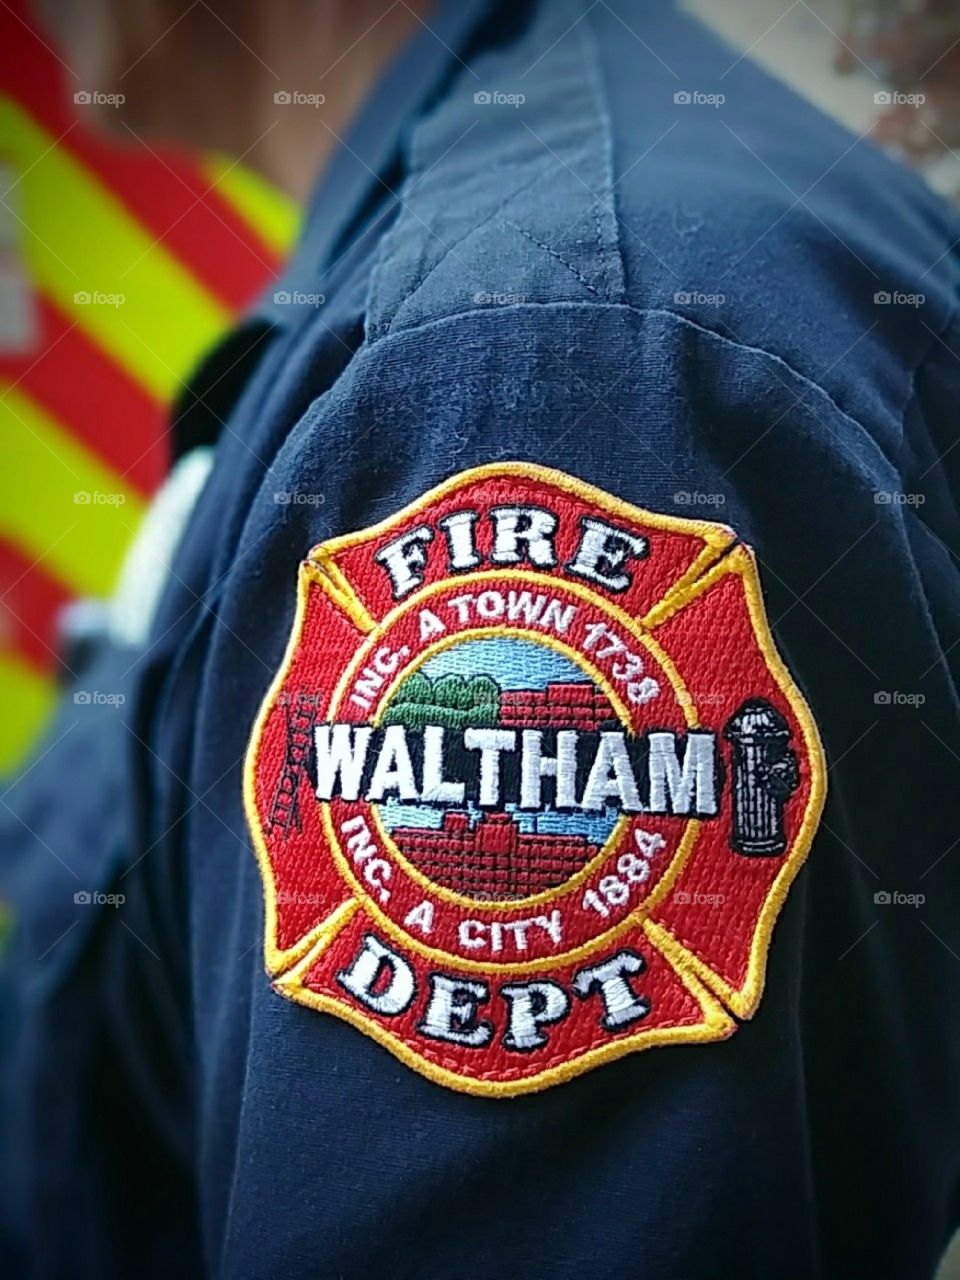 Fire fighter label